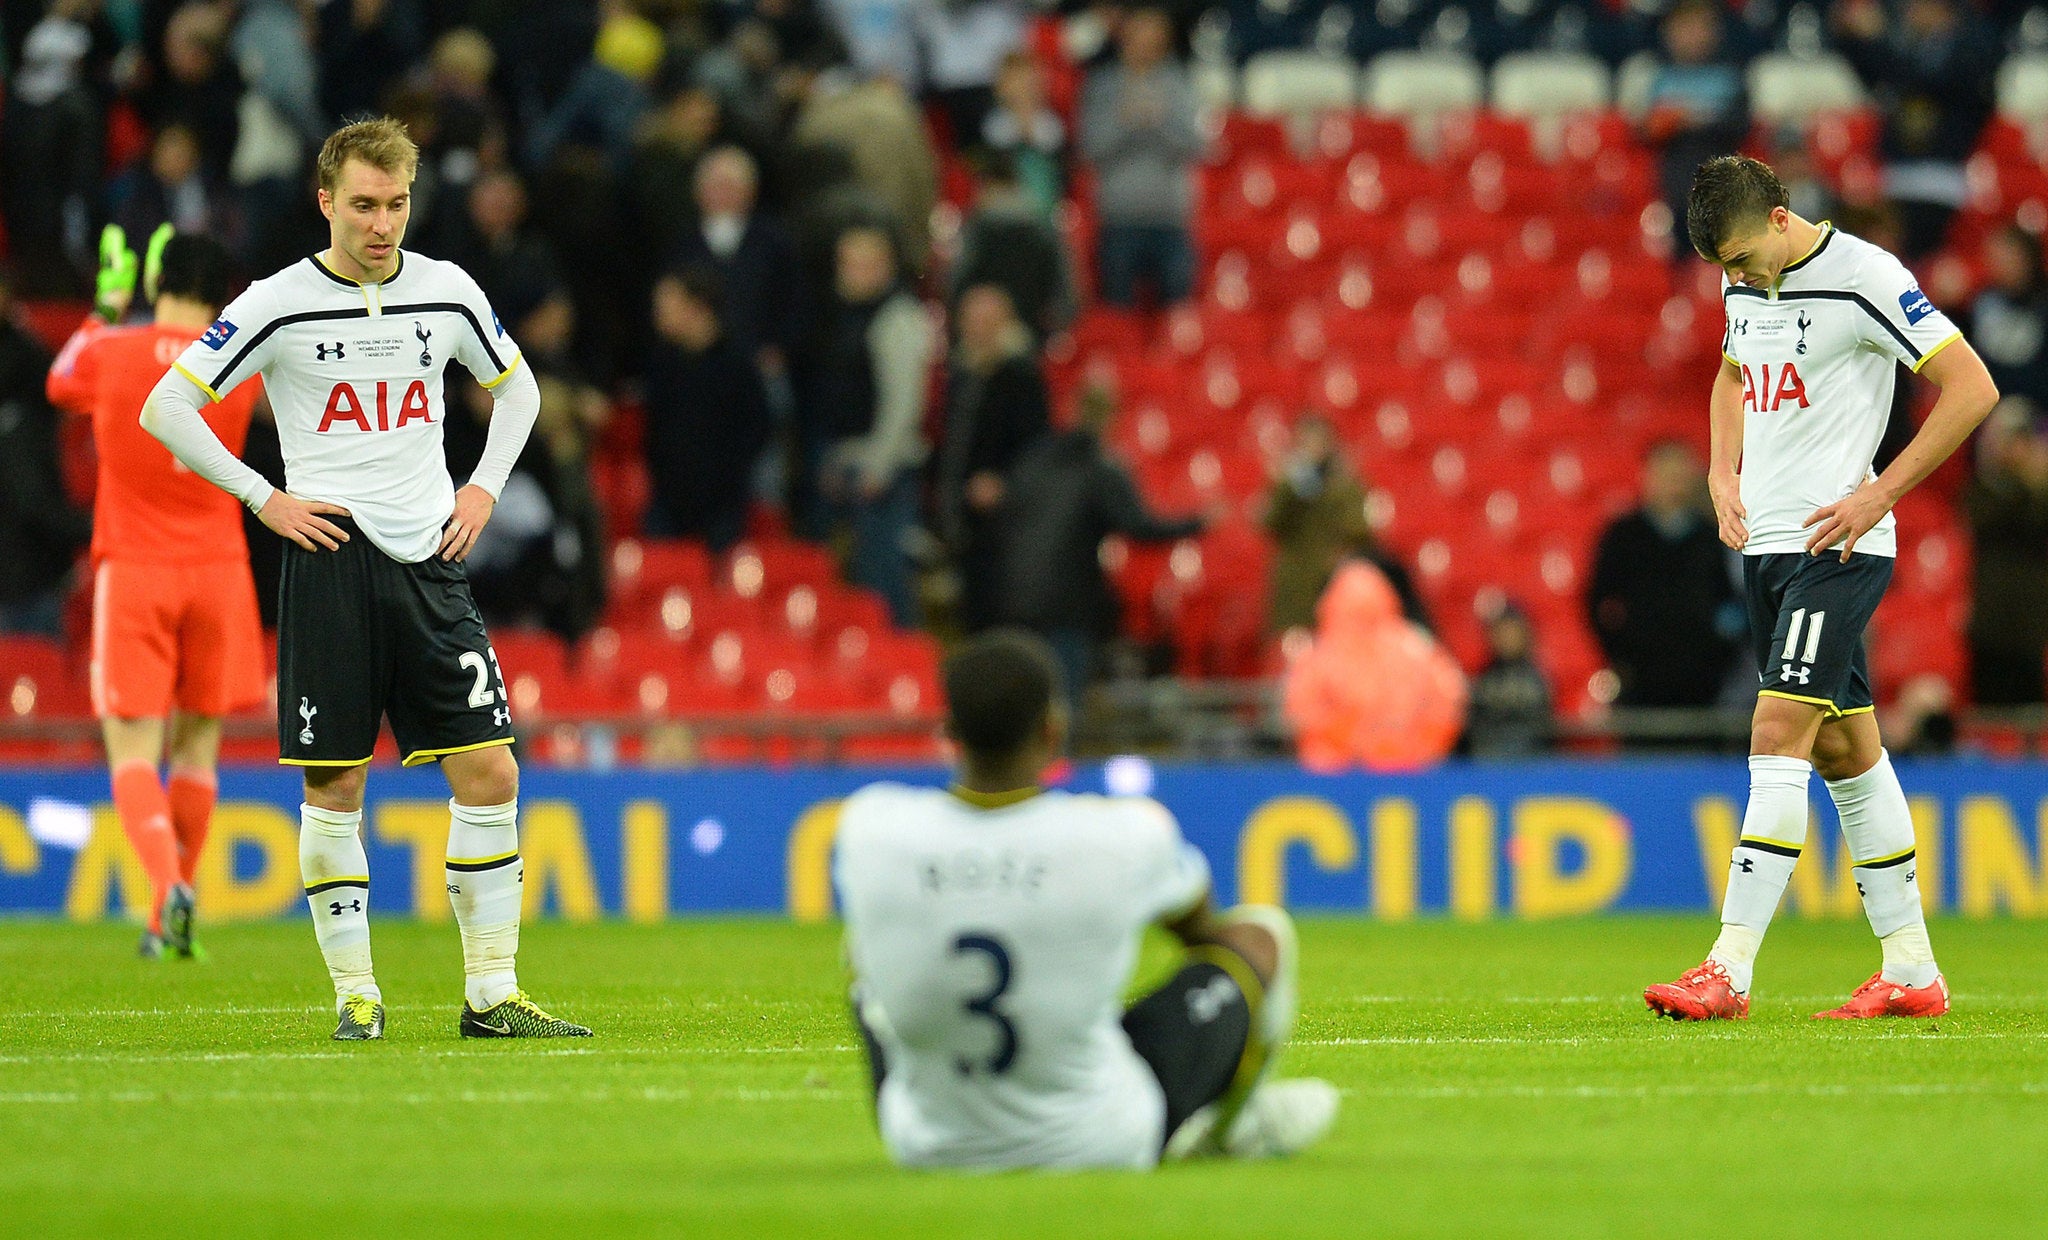 Tottenham's players despondent and dejected at the final whistle after losing to bitter rivals Chelsea at Wembley